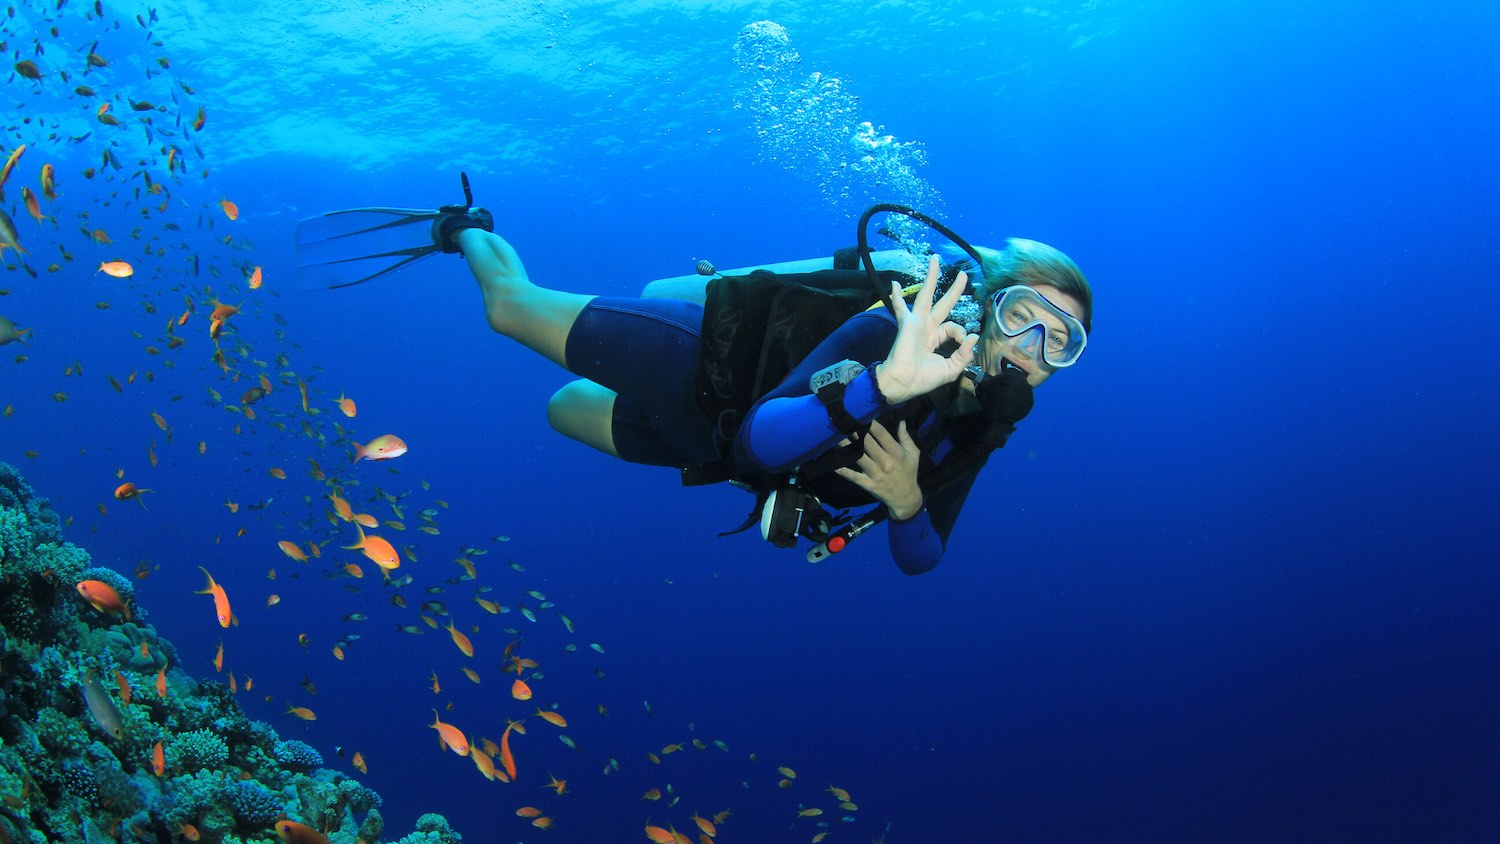 Enroll for Scuba Diving Hand Signals Course Online